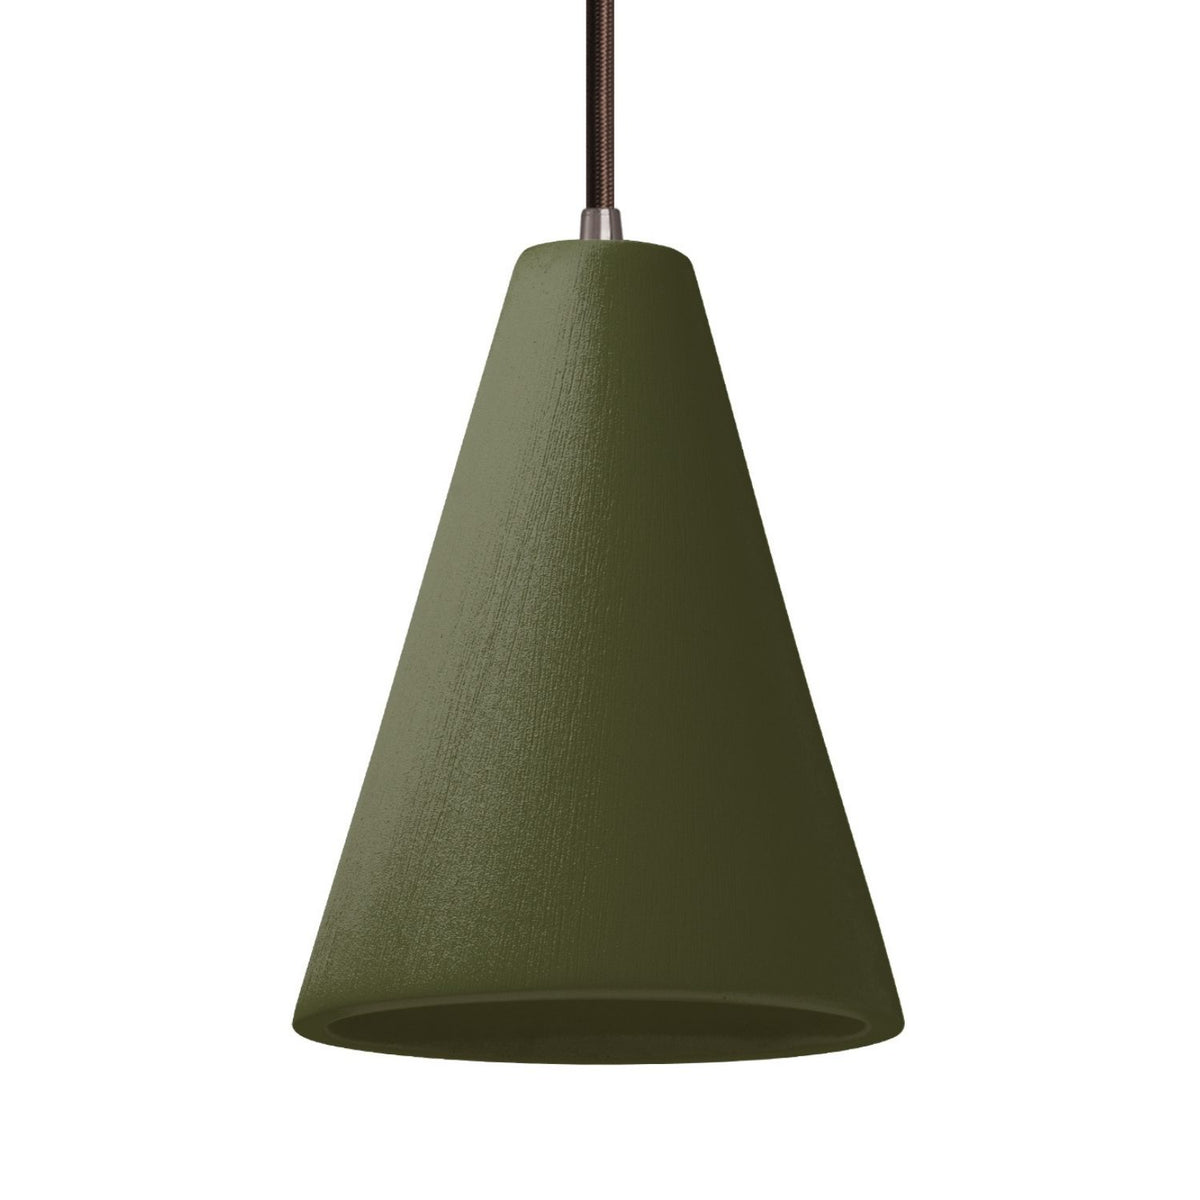 Geo Contemporary - P344 - Canes Pendant - Canes  - Military Green